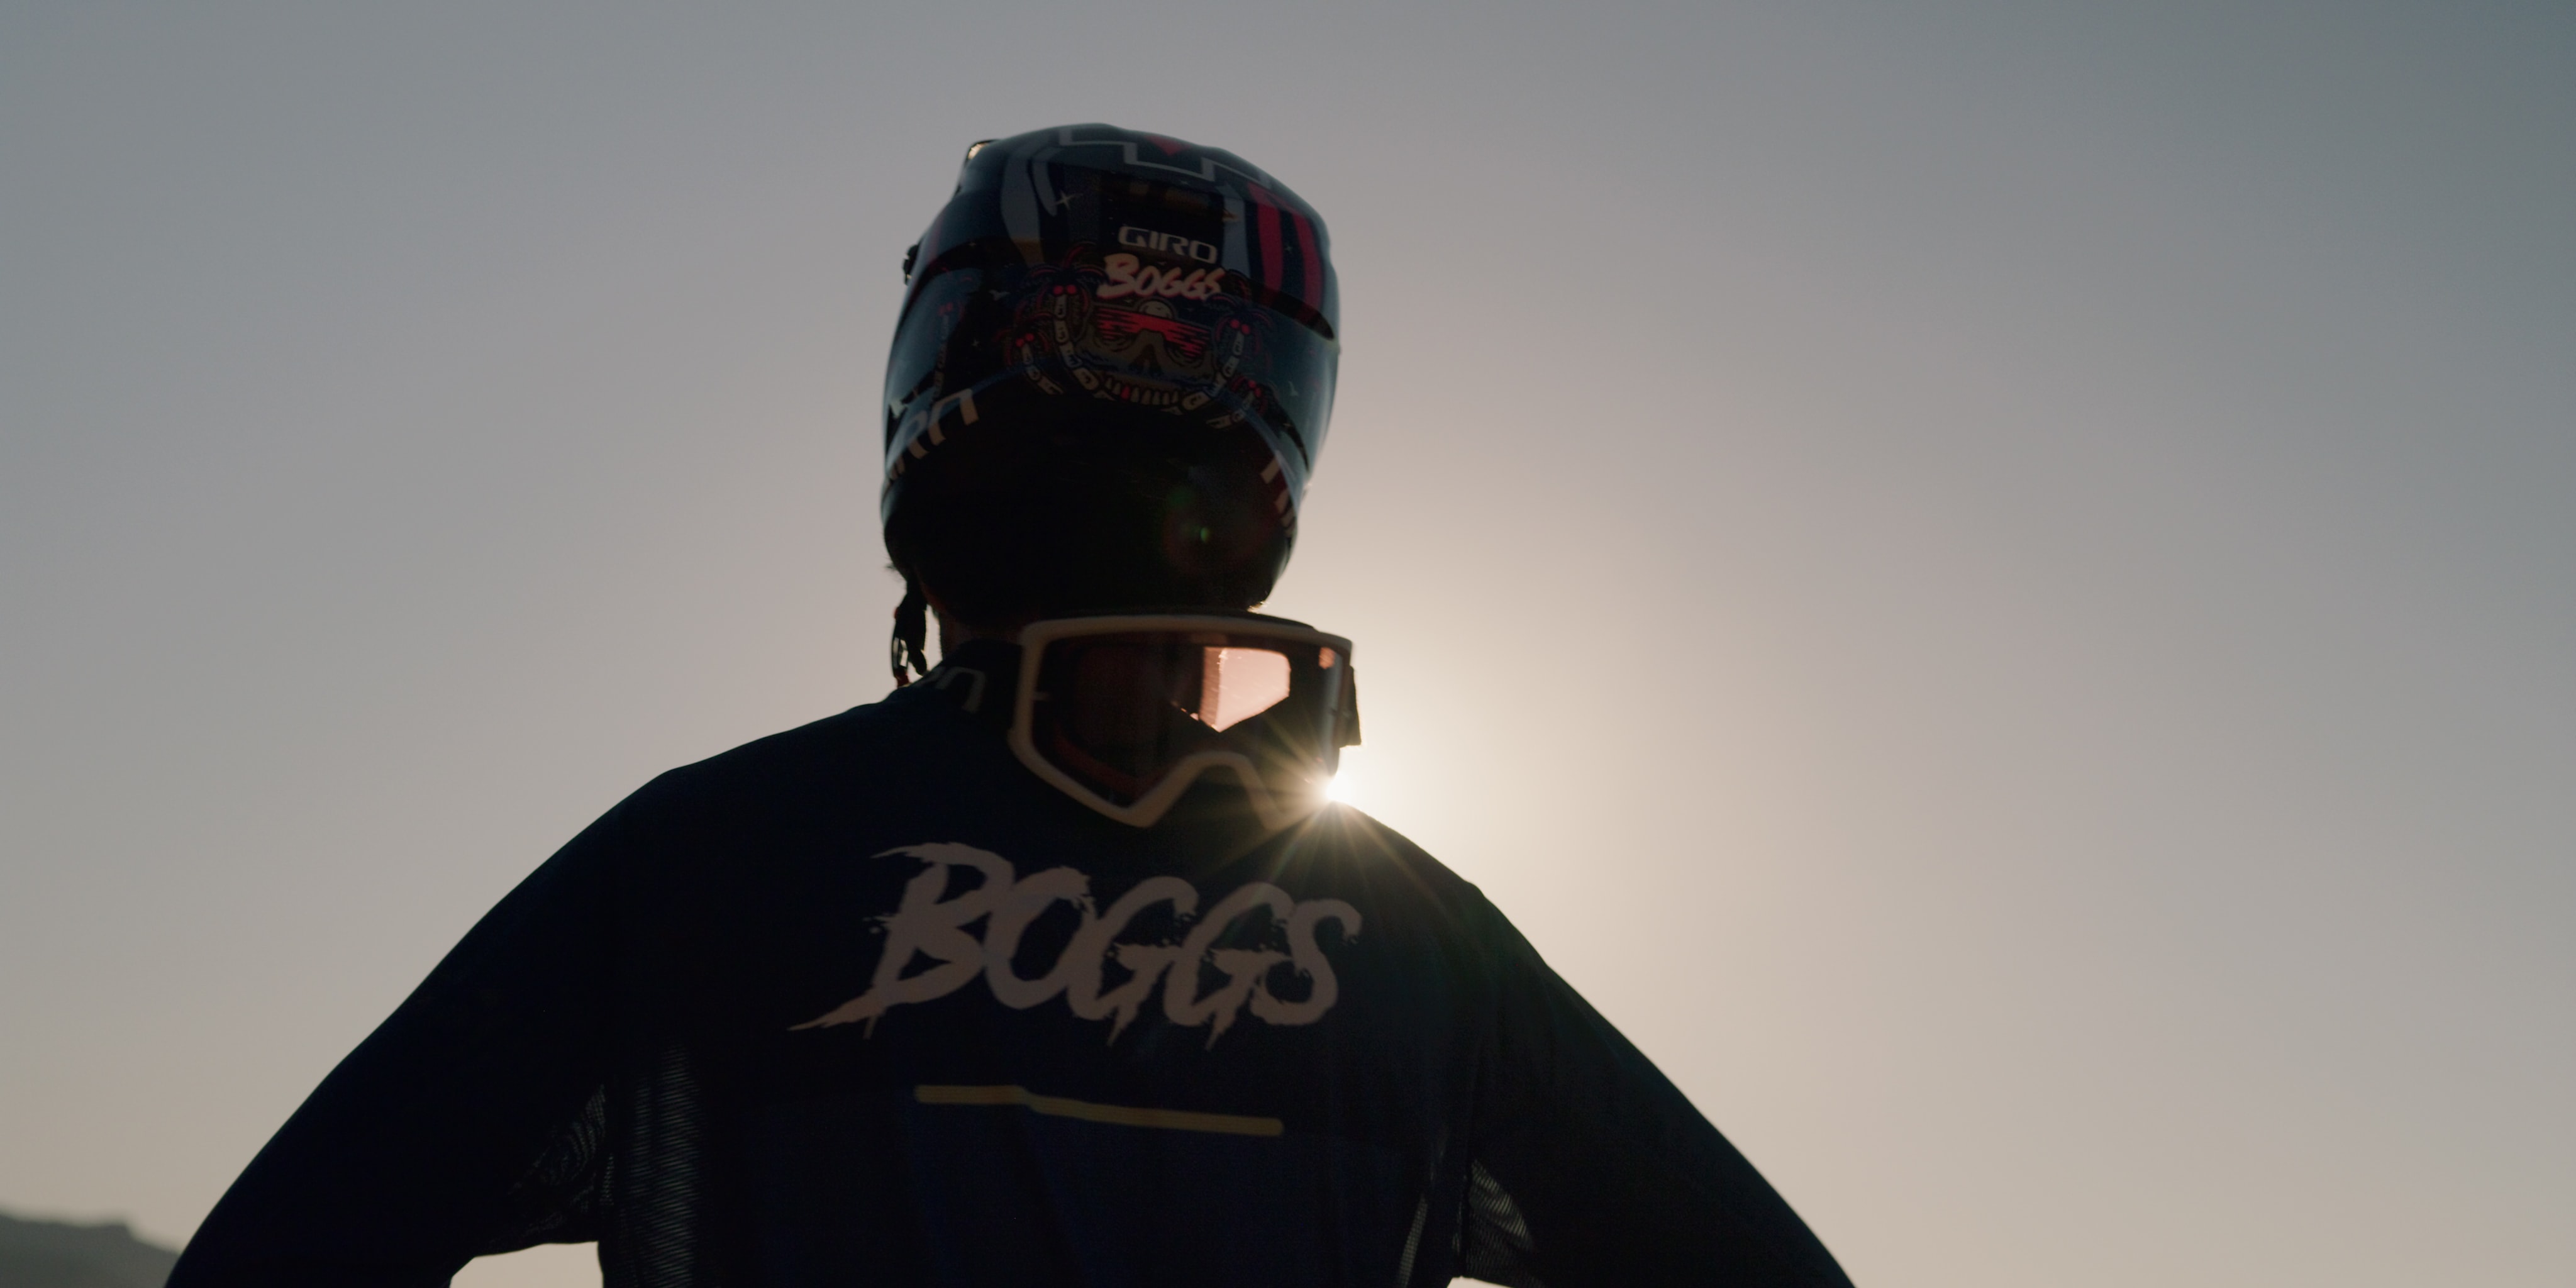 2021_ROC_Reed_Boggs_Intro_Frame_07